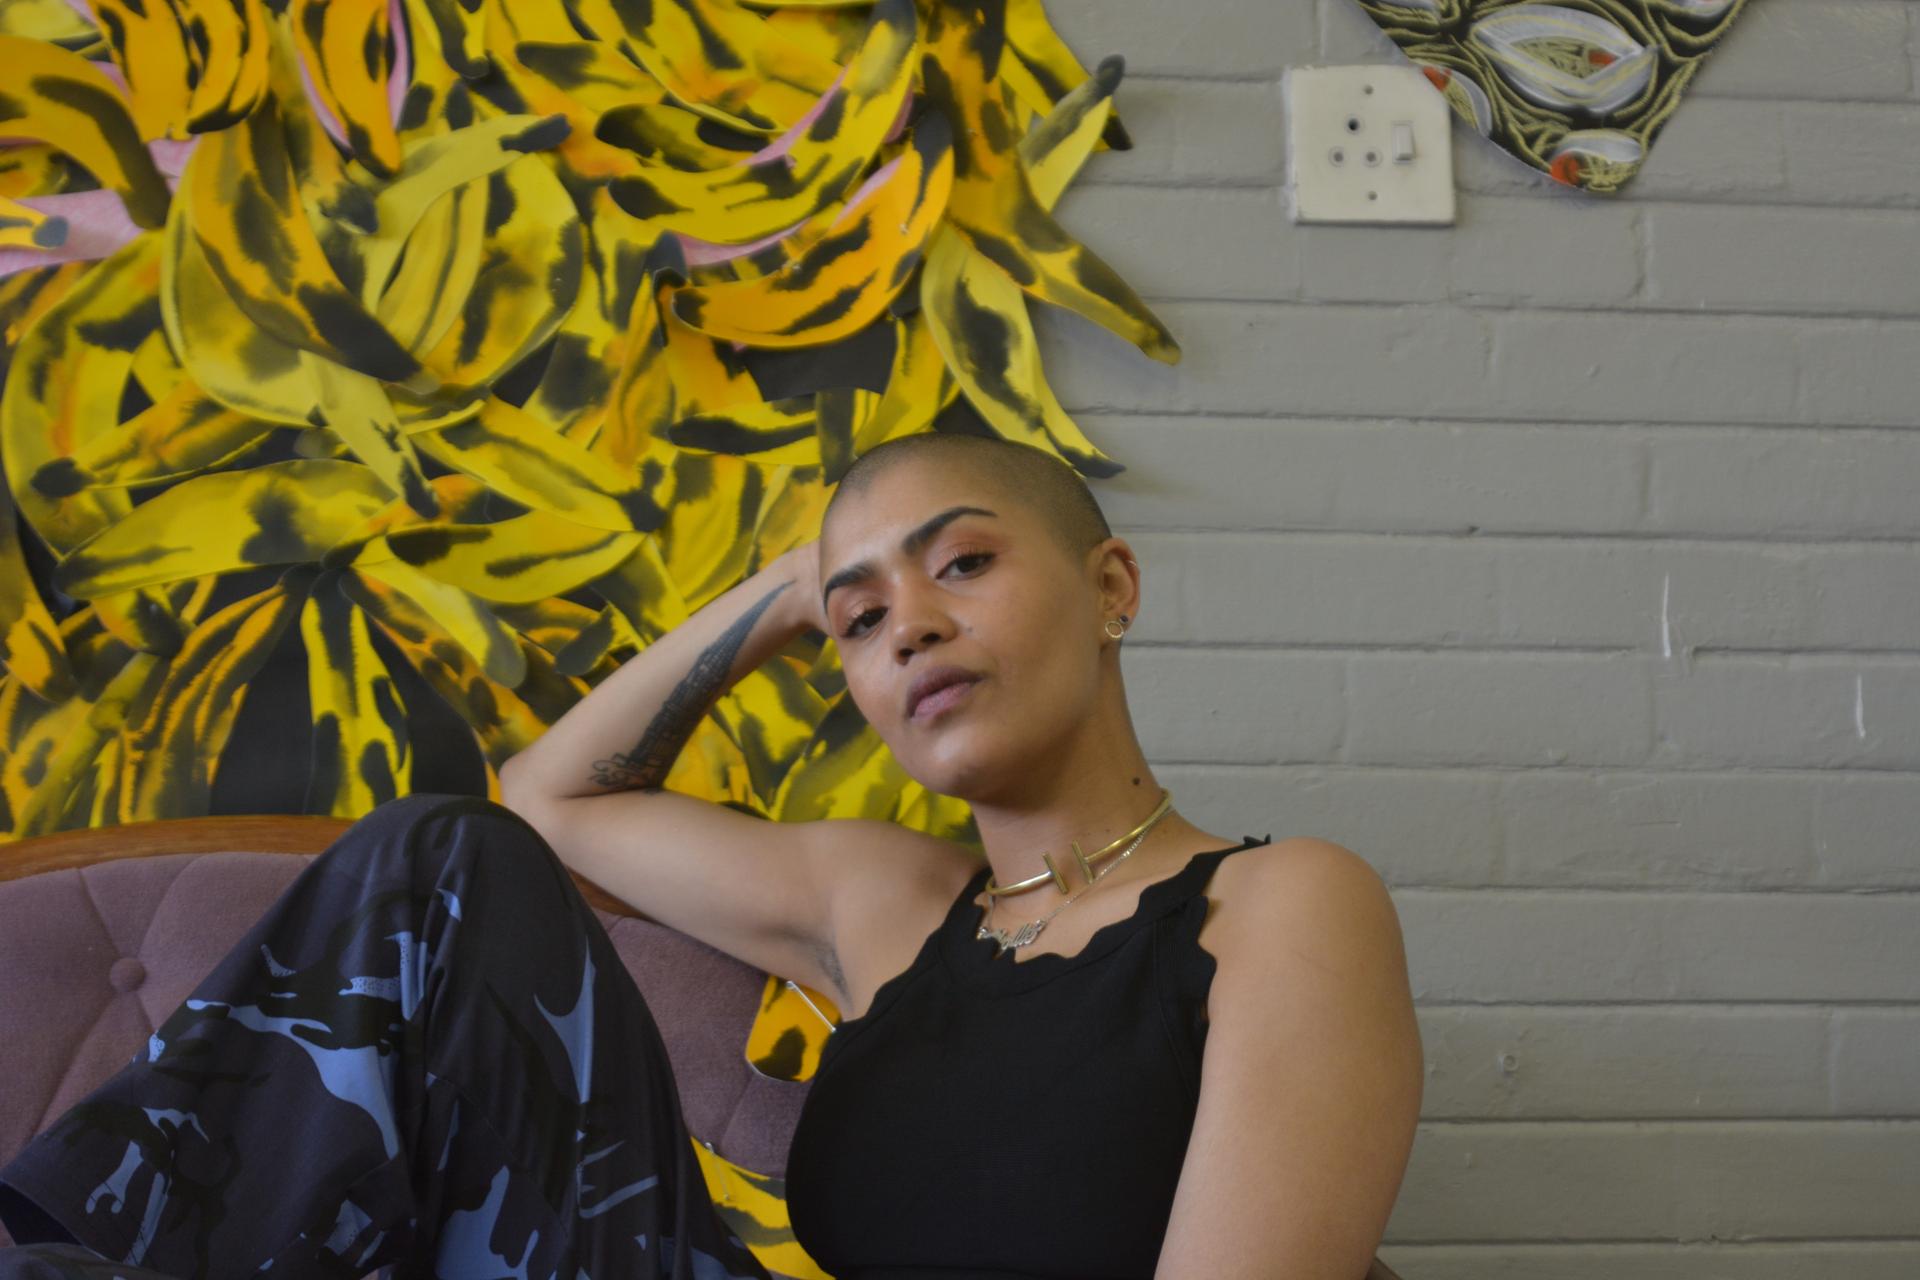 South African artist Lady Skollie on a sofa in her studio with cut-out shapes of bananas on the wall behind her